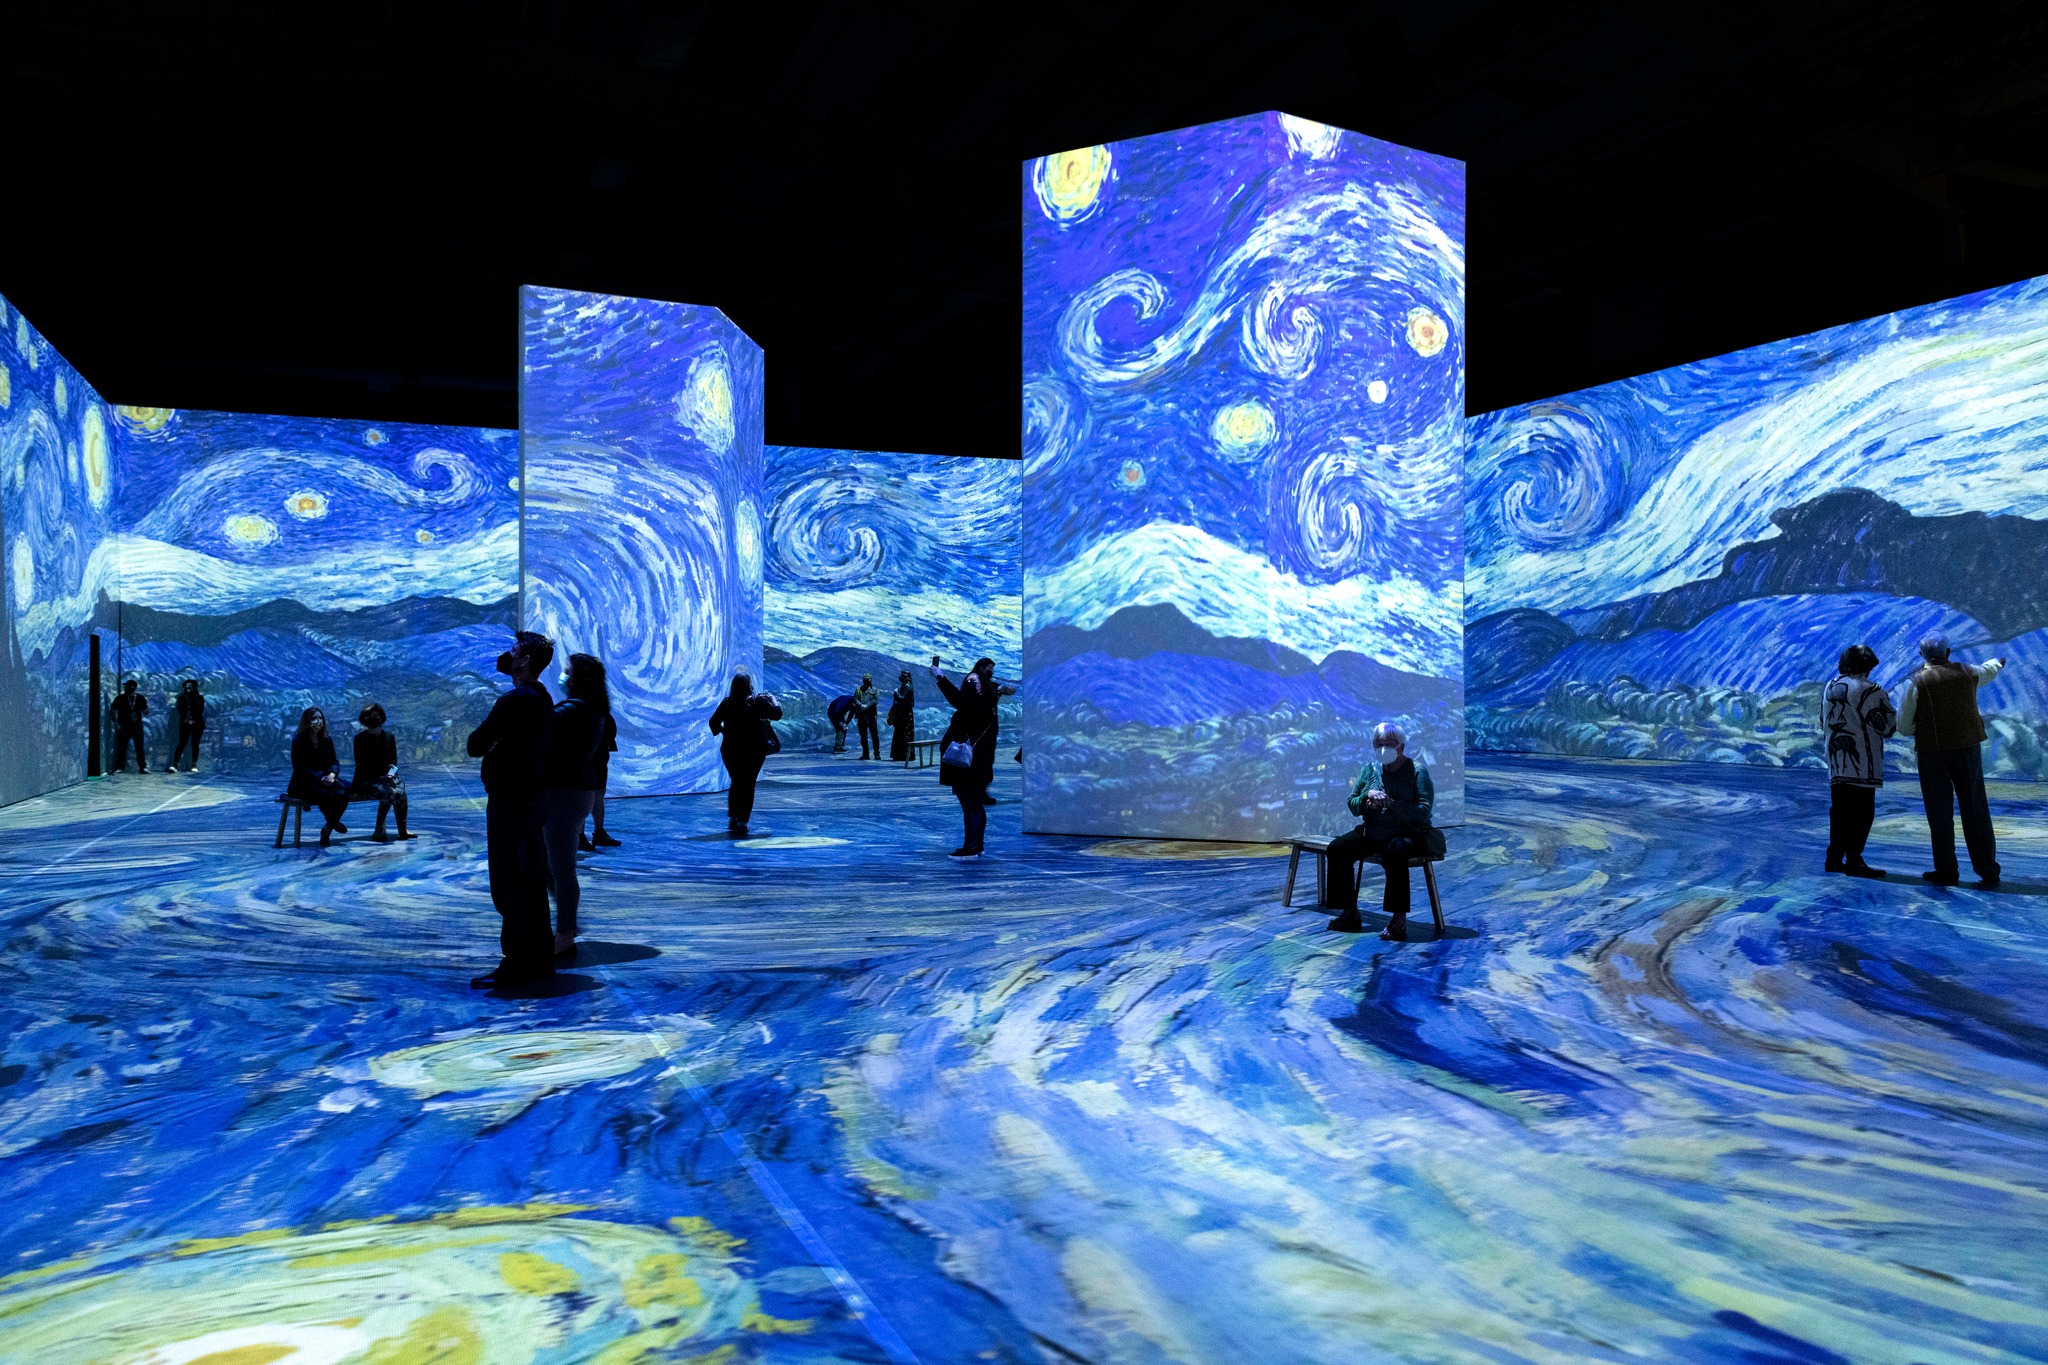 The LUME Indianapolis Feauring Van Gogh